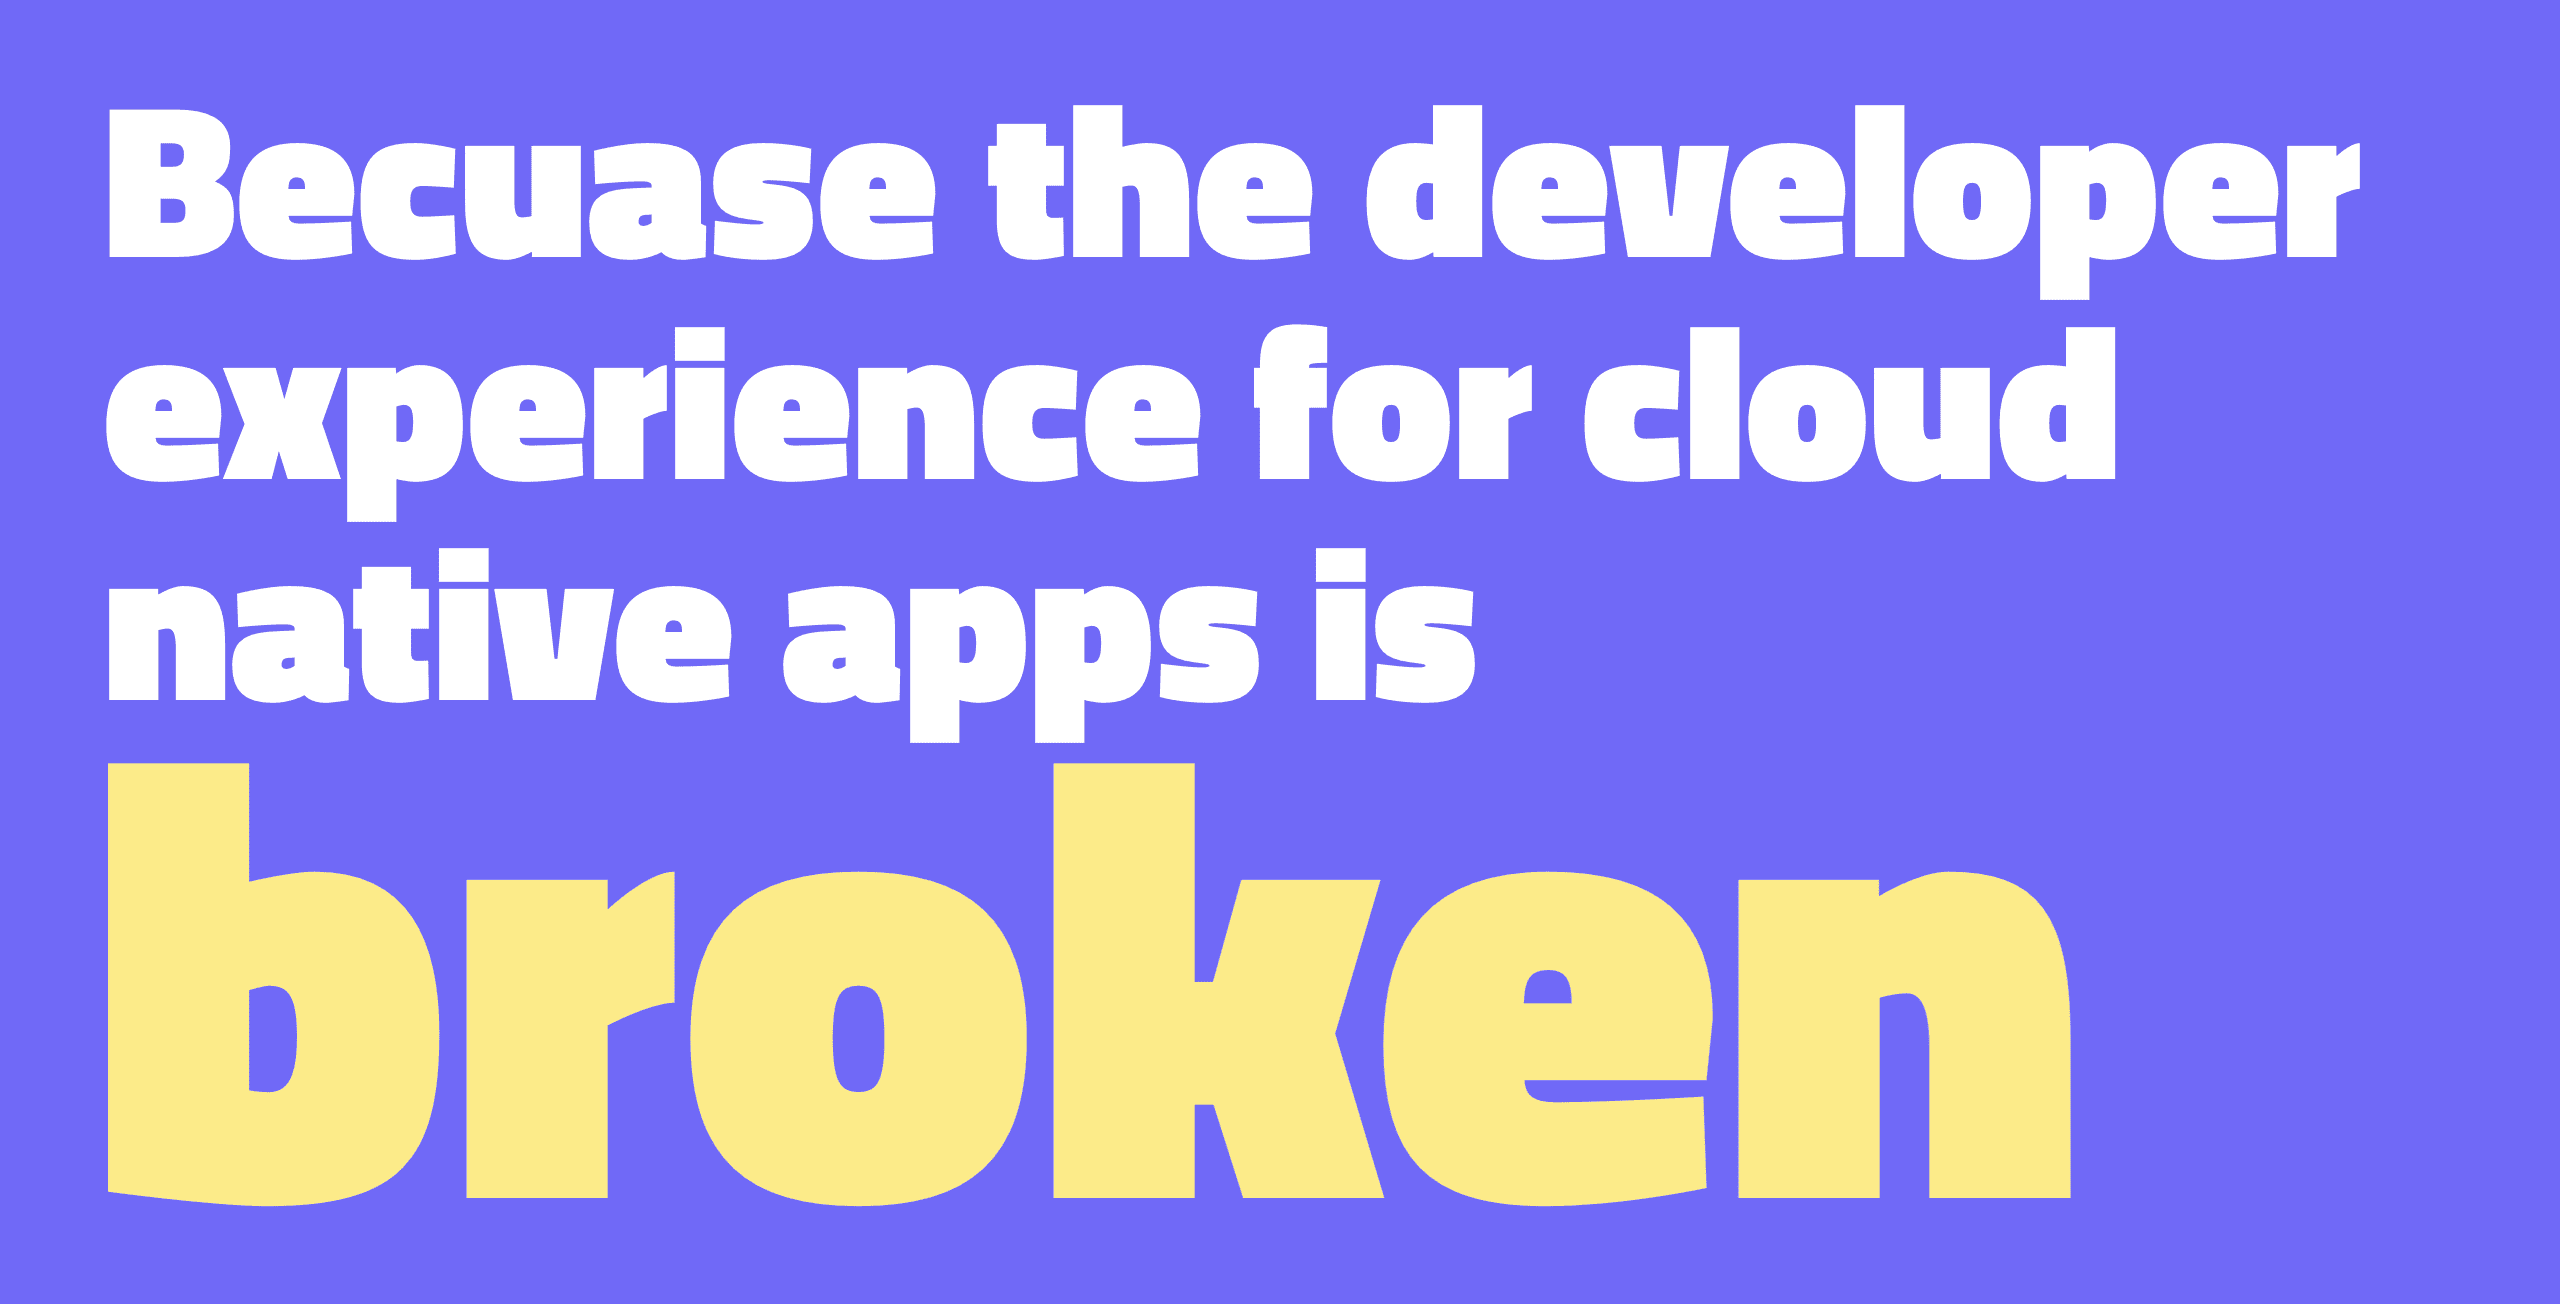 Because the developer experience for cloud native apps is broken